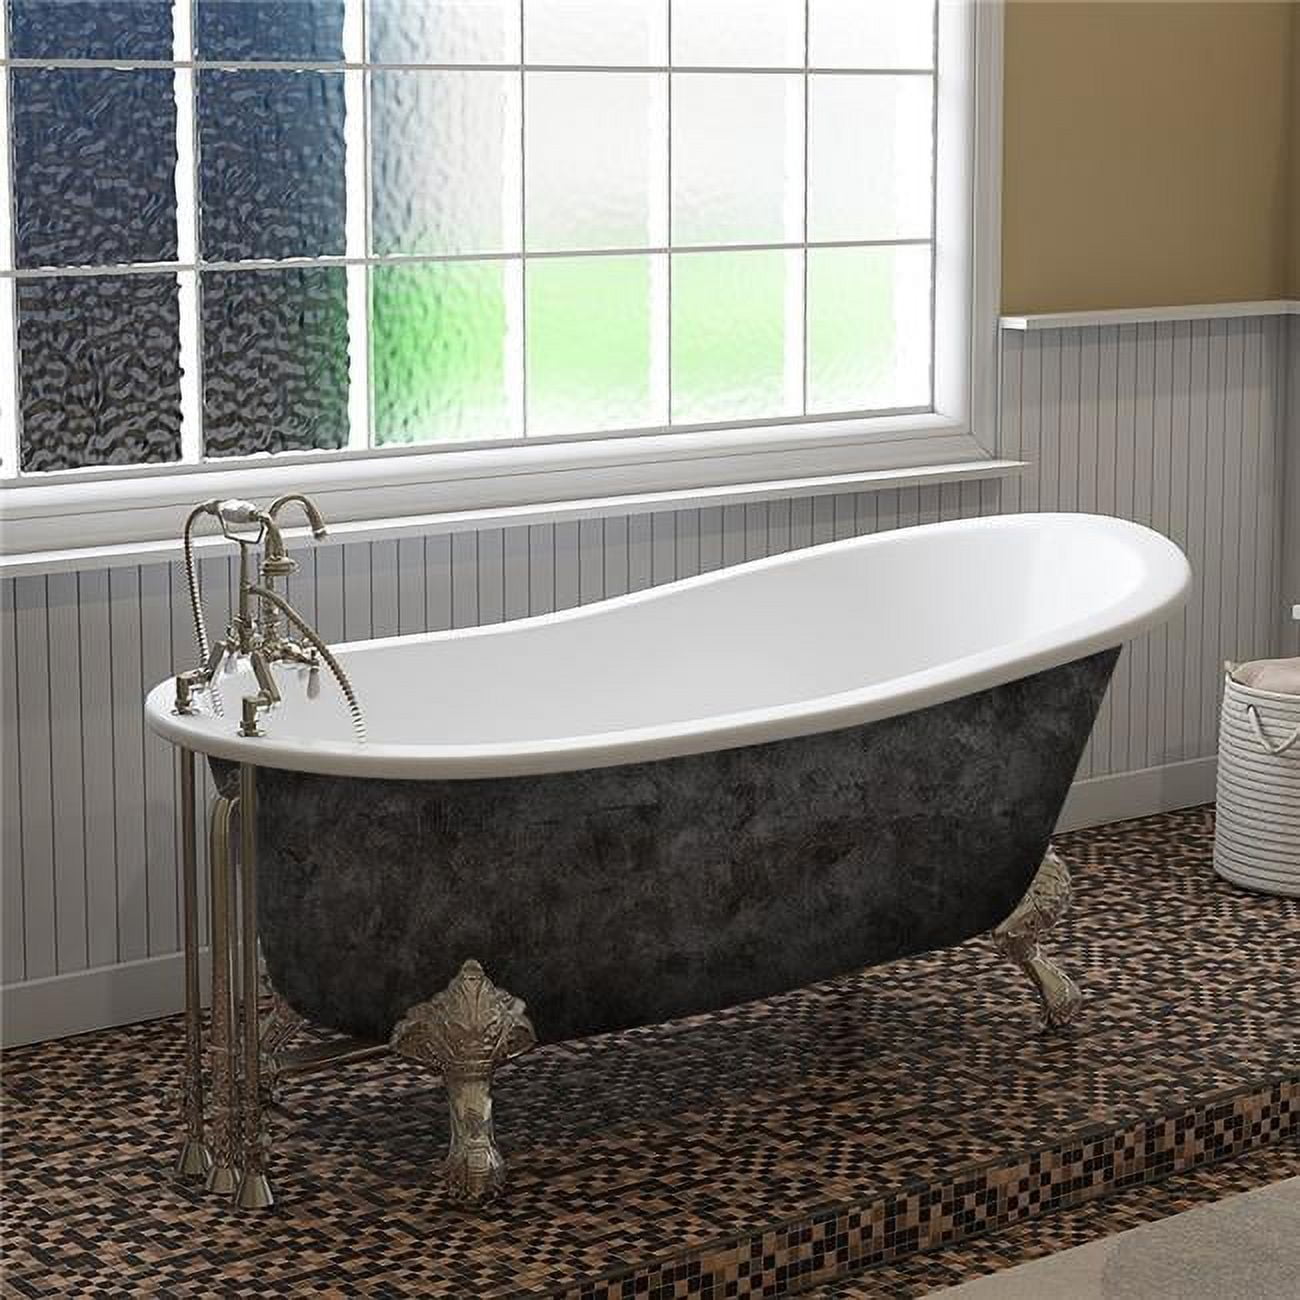 St67-dh-cp-sp 67 In. X 30 In. Scorched Platinum Cast Iron Slipper Bathtub With 7 In. Deck Mount Faucet Holes & Polished Chrome Ball & Claw Feet